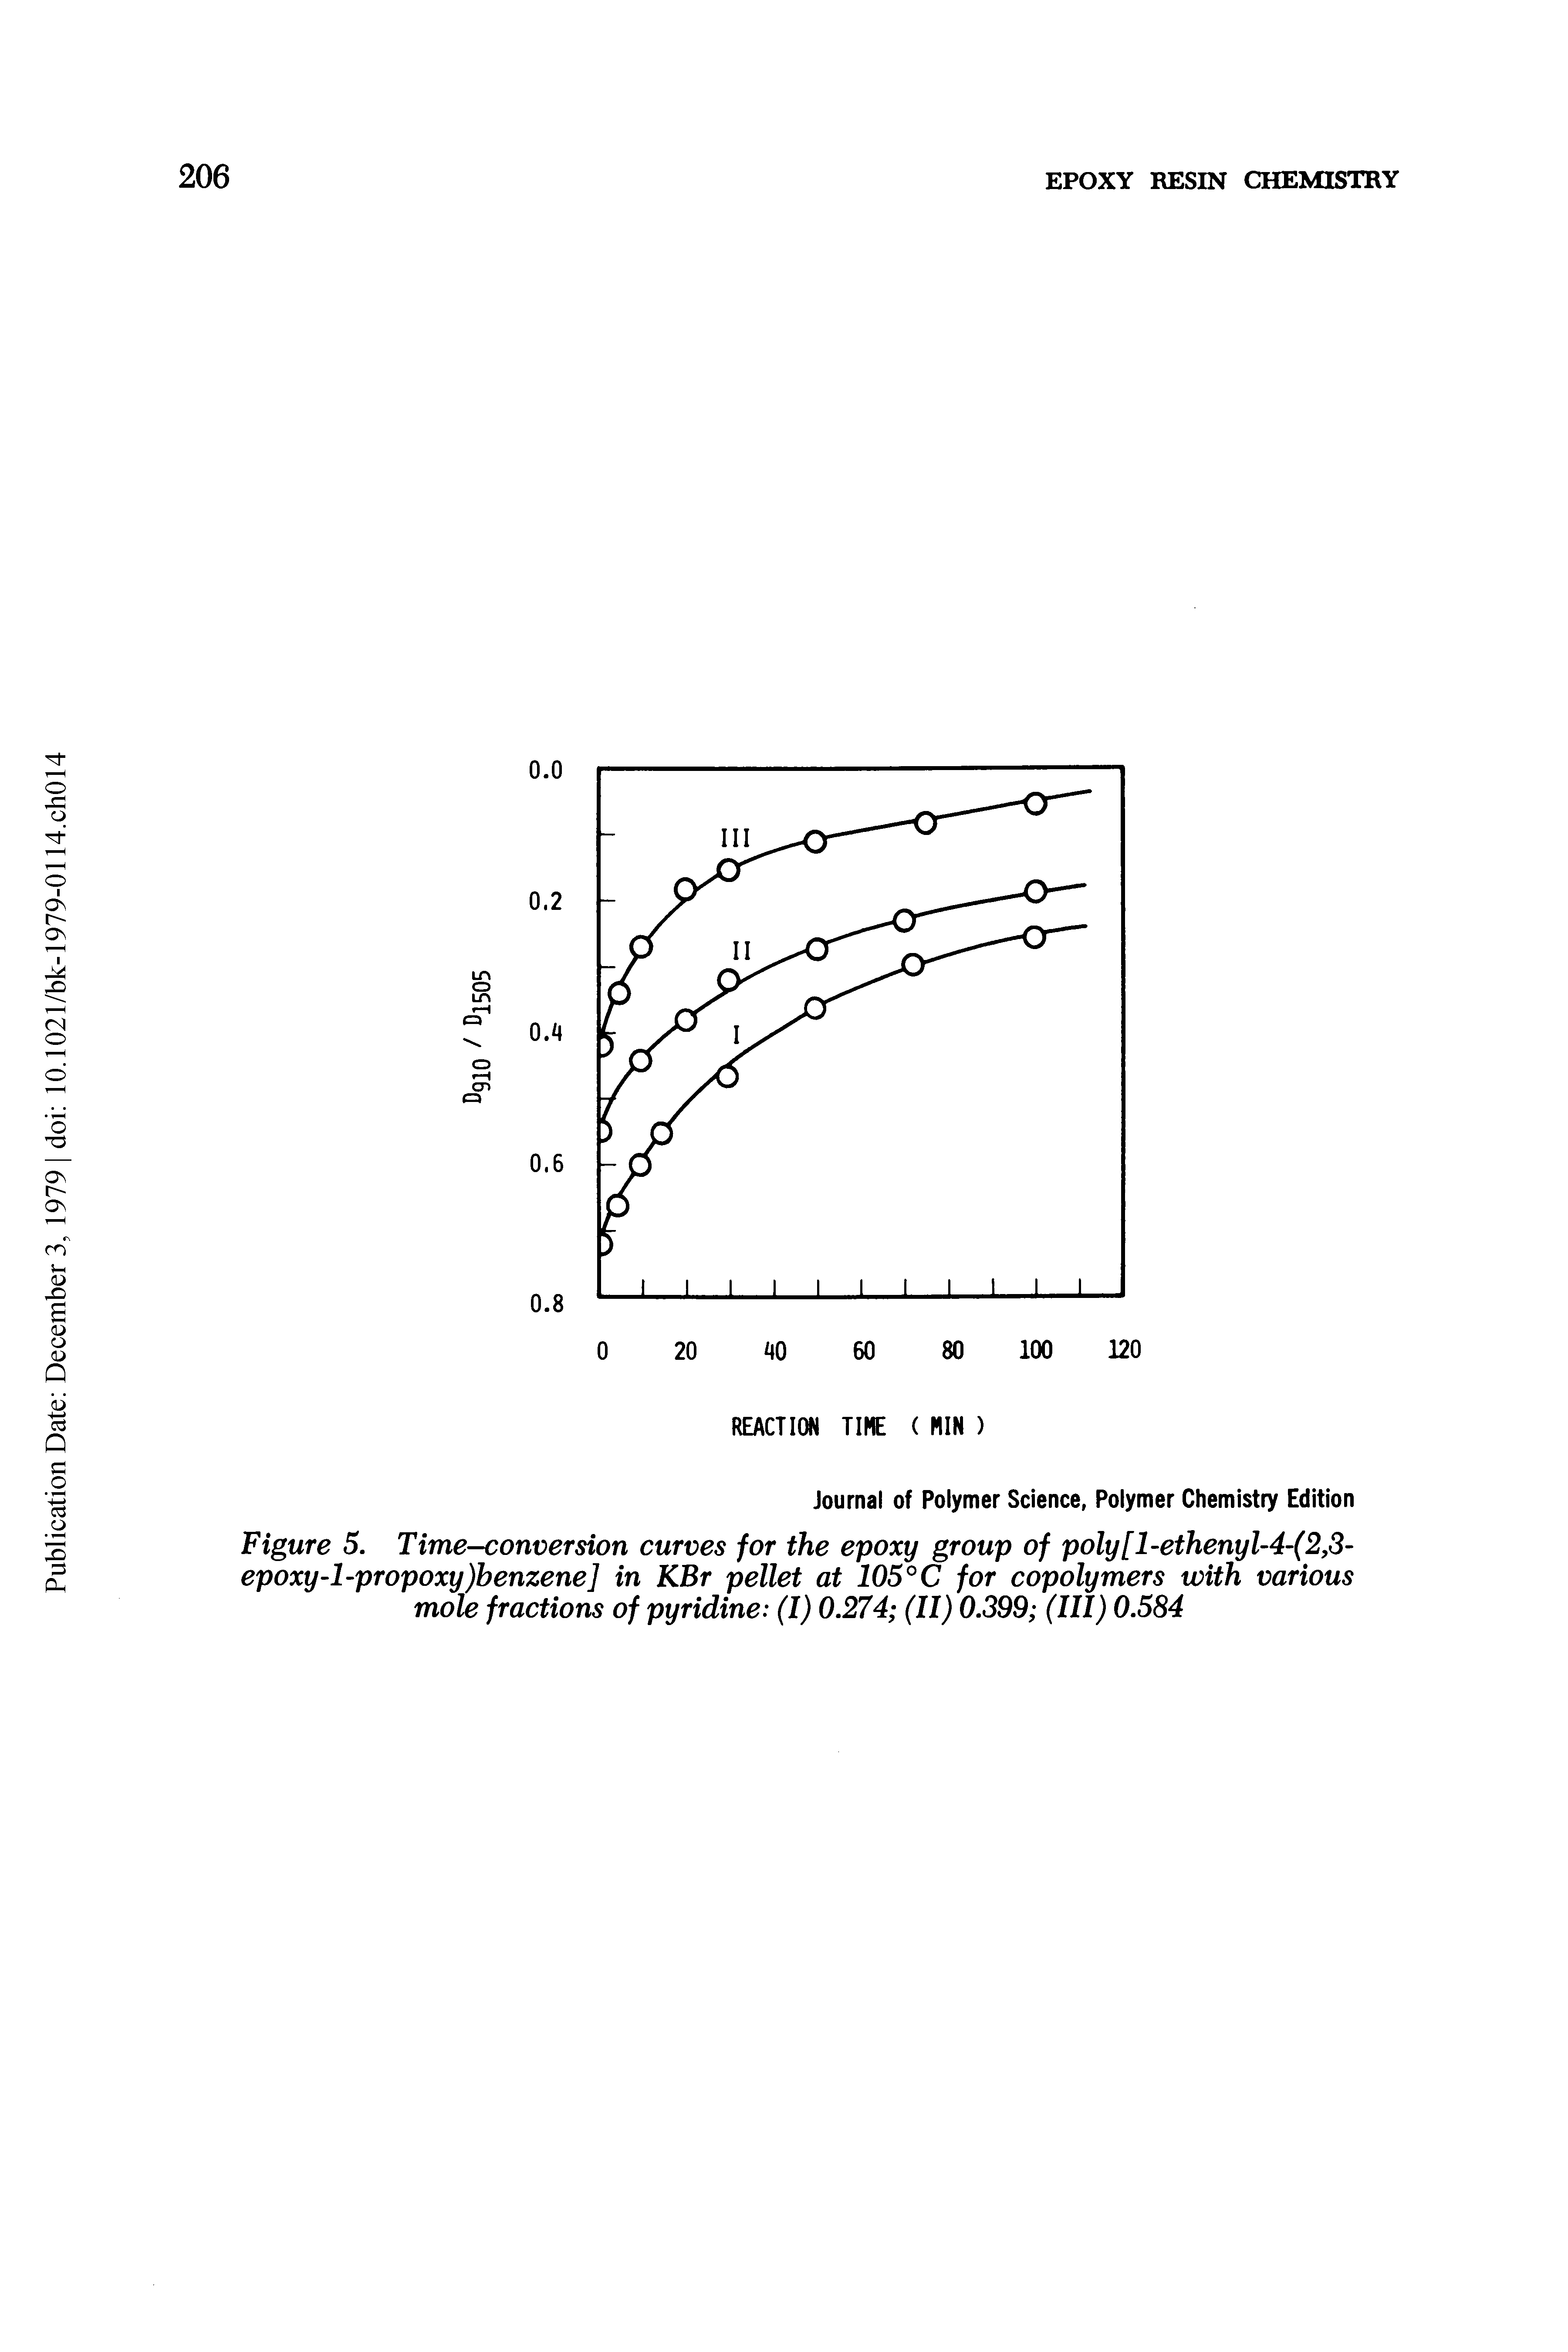 Figure 5. Time-conversion curves for the epoxy group of poly[l-ethenyl-4-(2,3-epoxy-l-propoxy)benzene] in KBr pellet at 105°C for copolymers with various mole fractions of pyridine (I) 0.274 (II) 0.399 (III) 0.584...